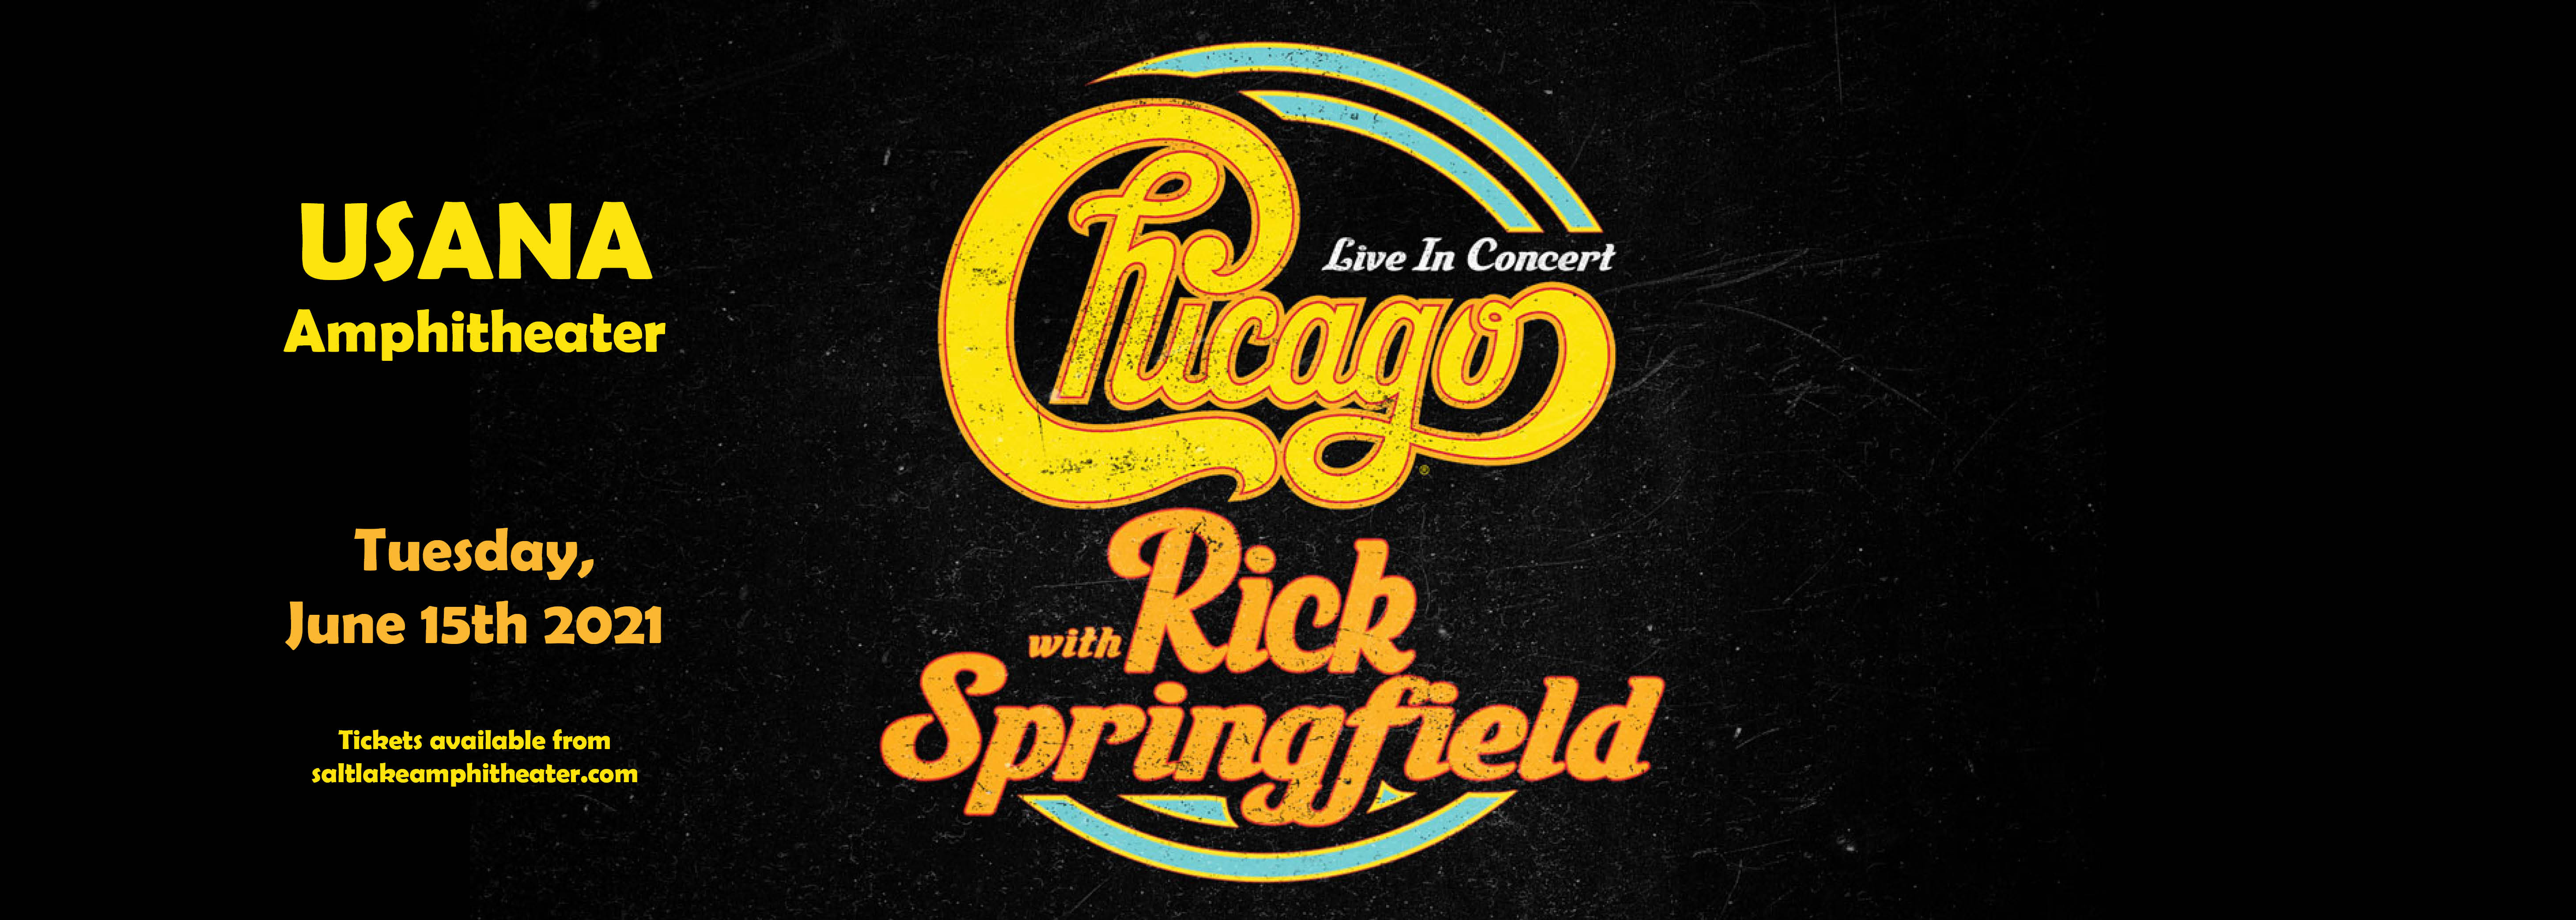 Chicago - The Band & Rick Springfield [CANCELLED] at USANA Amphitheater